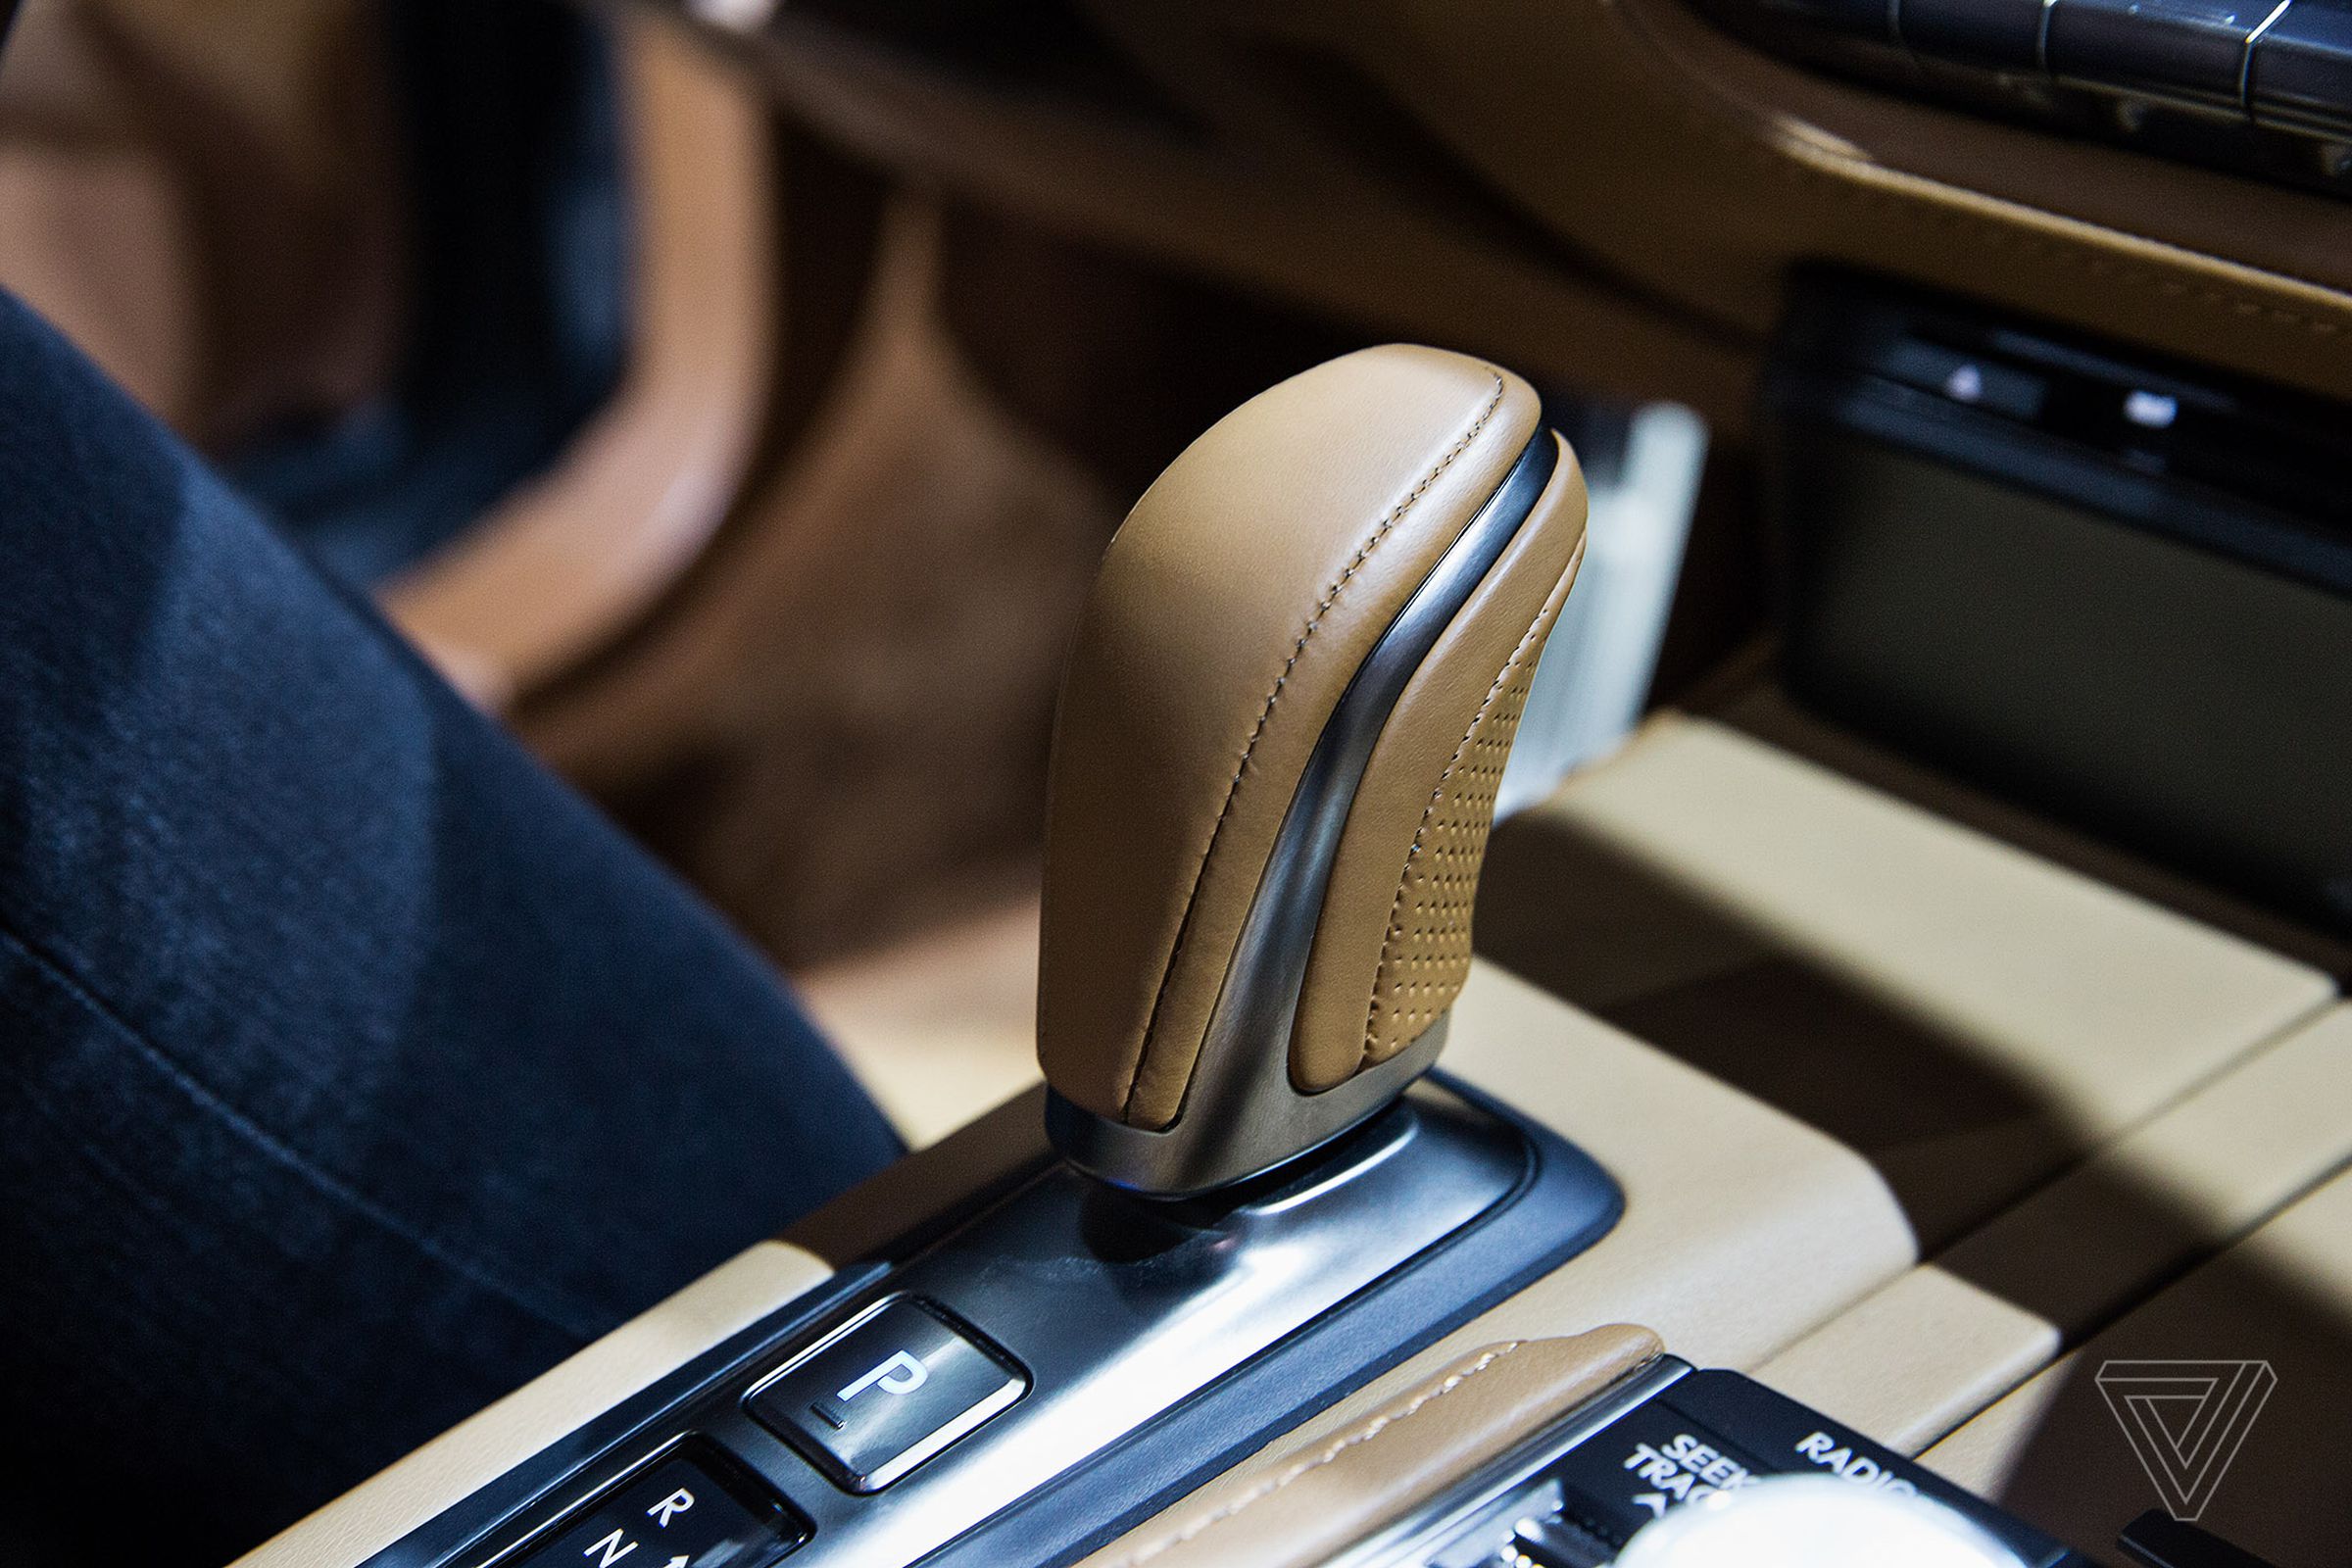 The interior of this Lexus LC 500h was all leather and suede with a joystick-like gear shift to match.